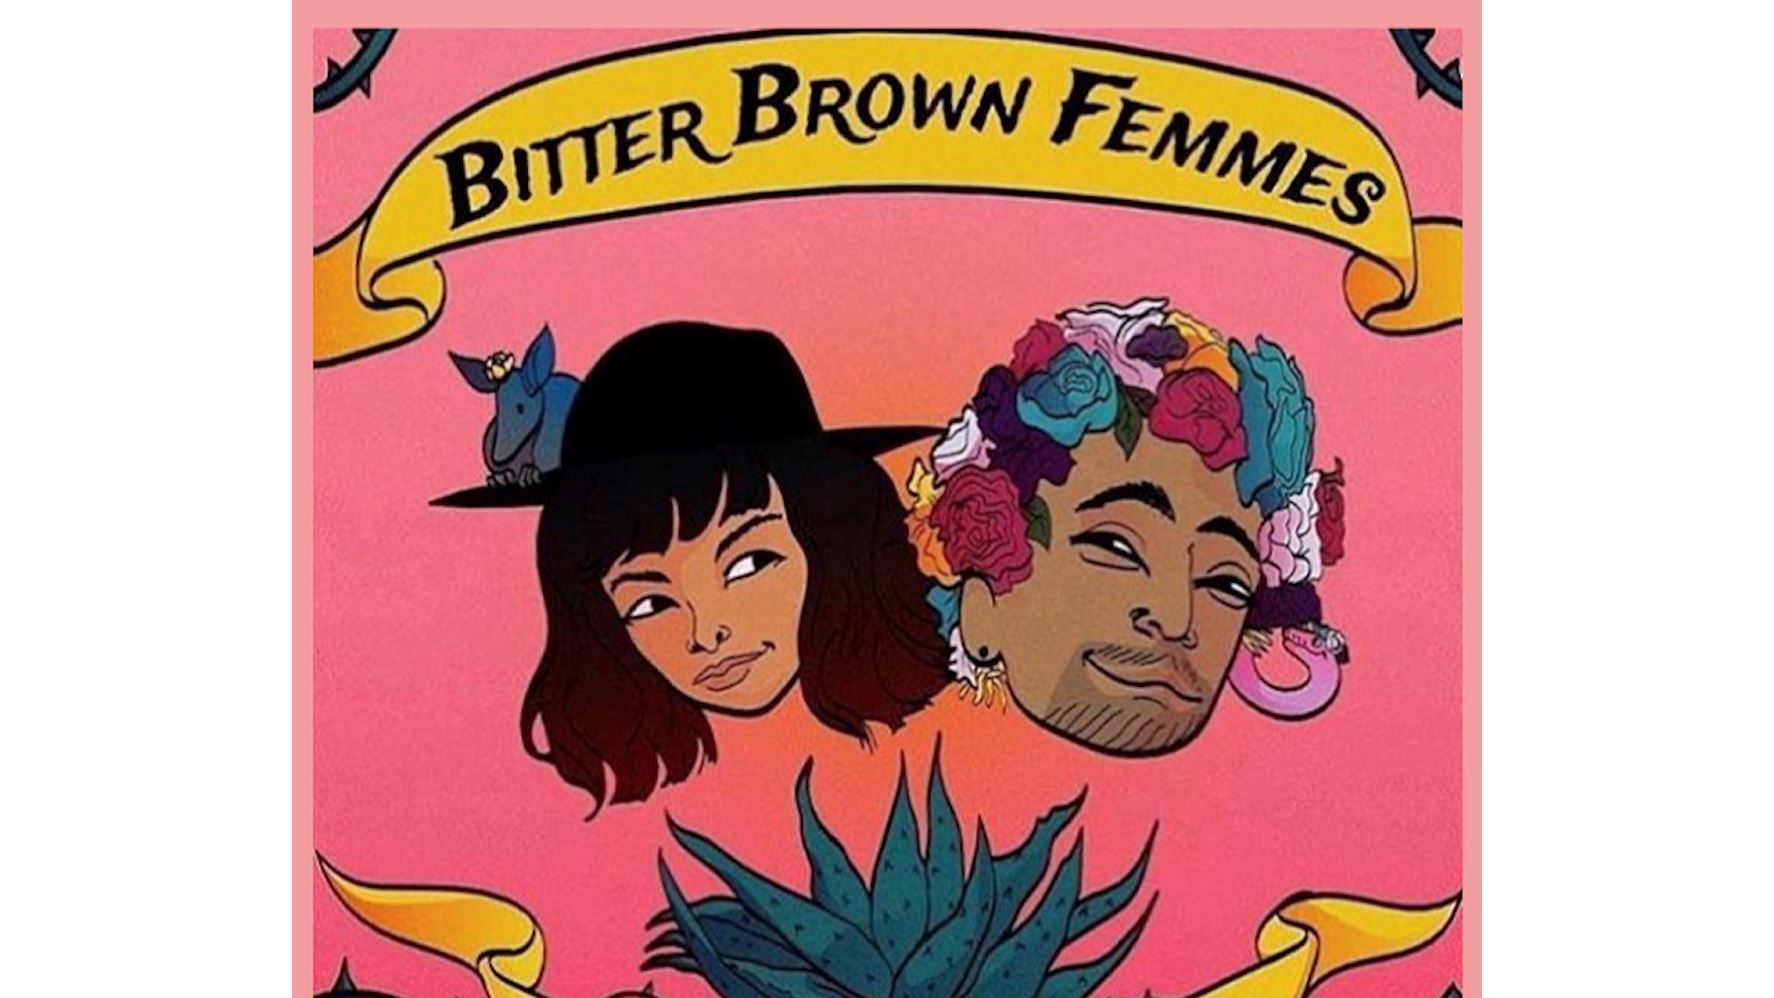 NMSU to host activist stars of podcast, “Bitter Brown Femmes” at public event Mar. 10